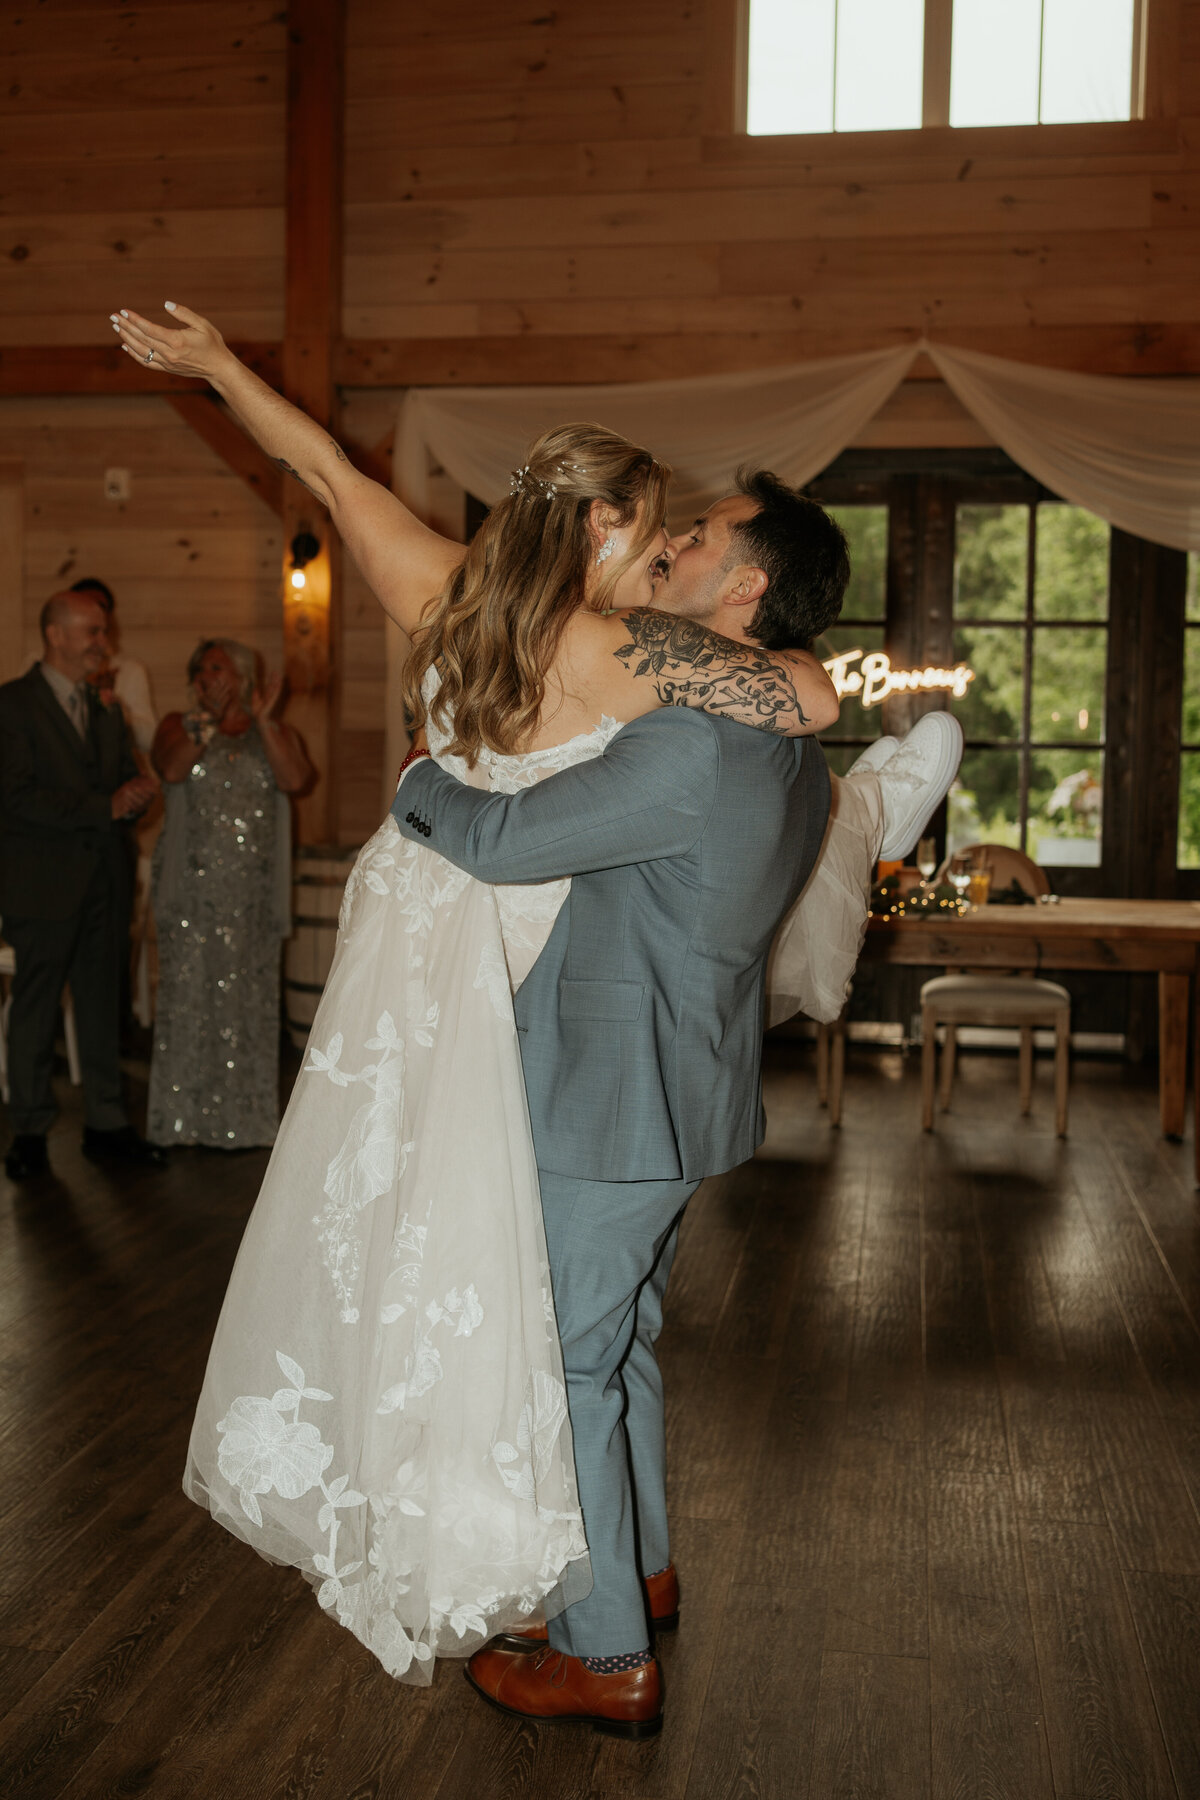 Bride and groom share an enthusiastic embrace on the dance floor during their wedding reception. The bride, in a lace gown with visible tattoos, lifts her arm in celebration while the groom, in a light grey suit, holds her tightly. Guests in the background applaud and cheer, highlighting the joyous and lively atmosphere of the occasion.